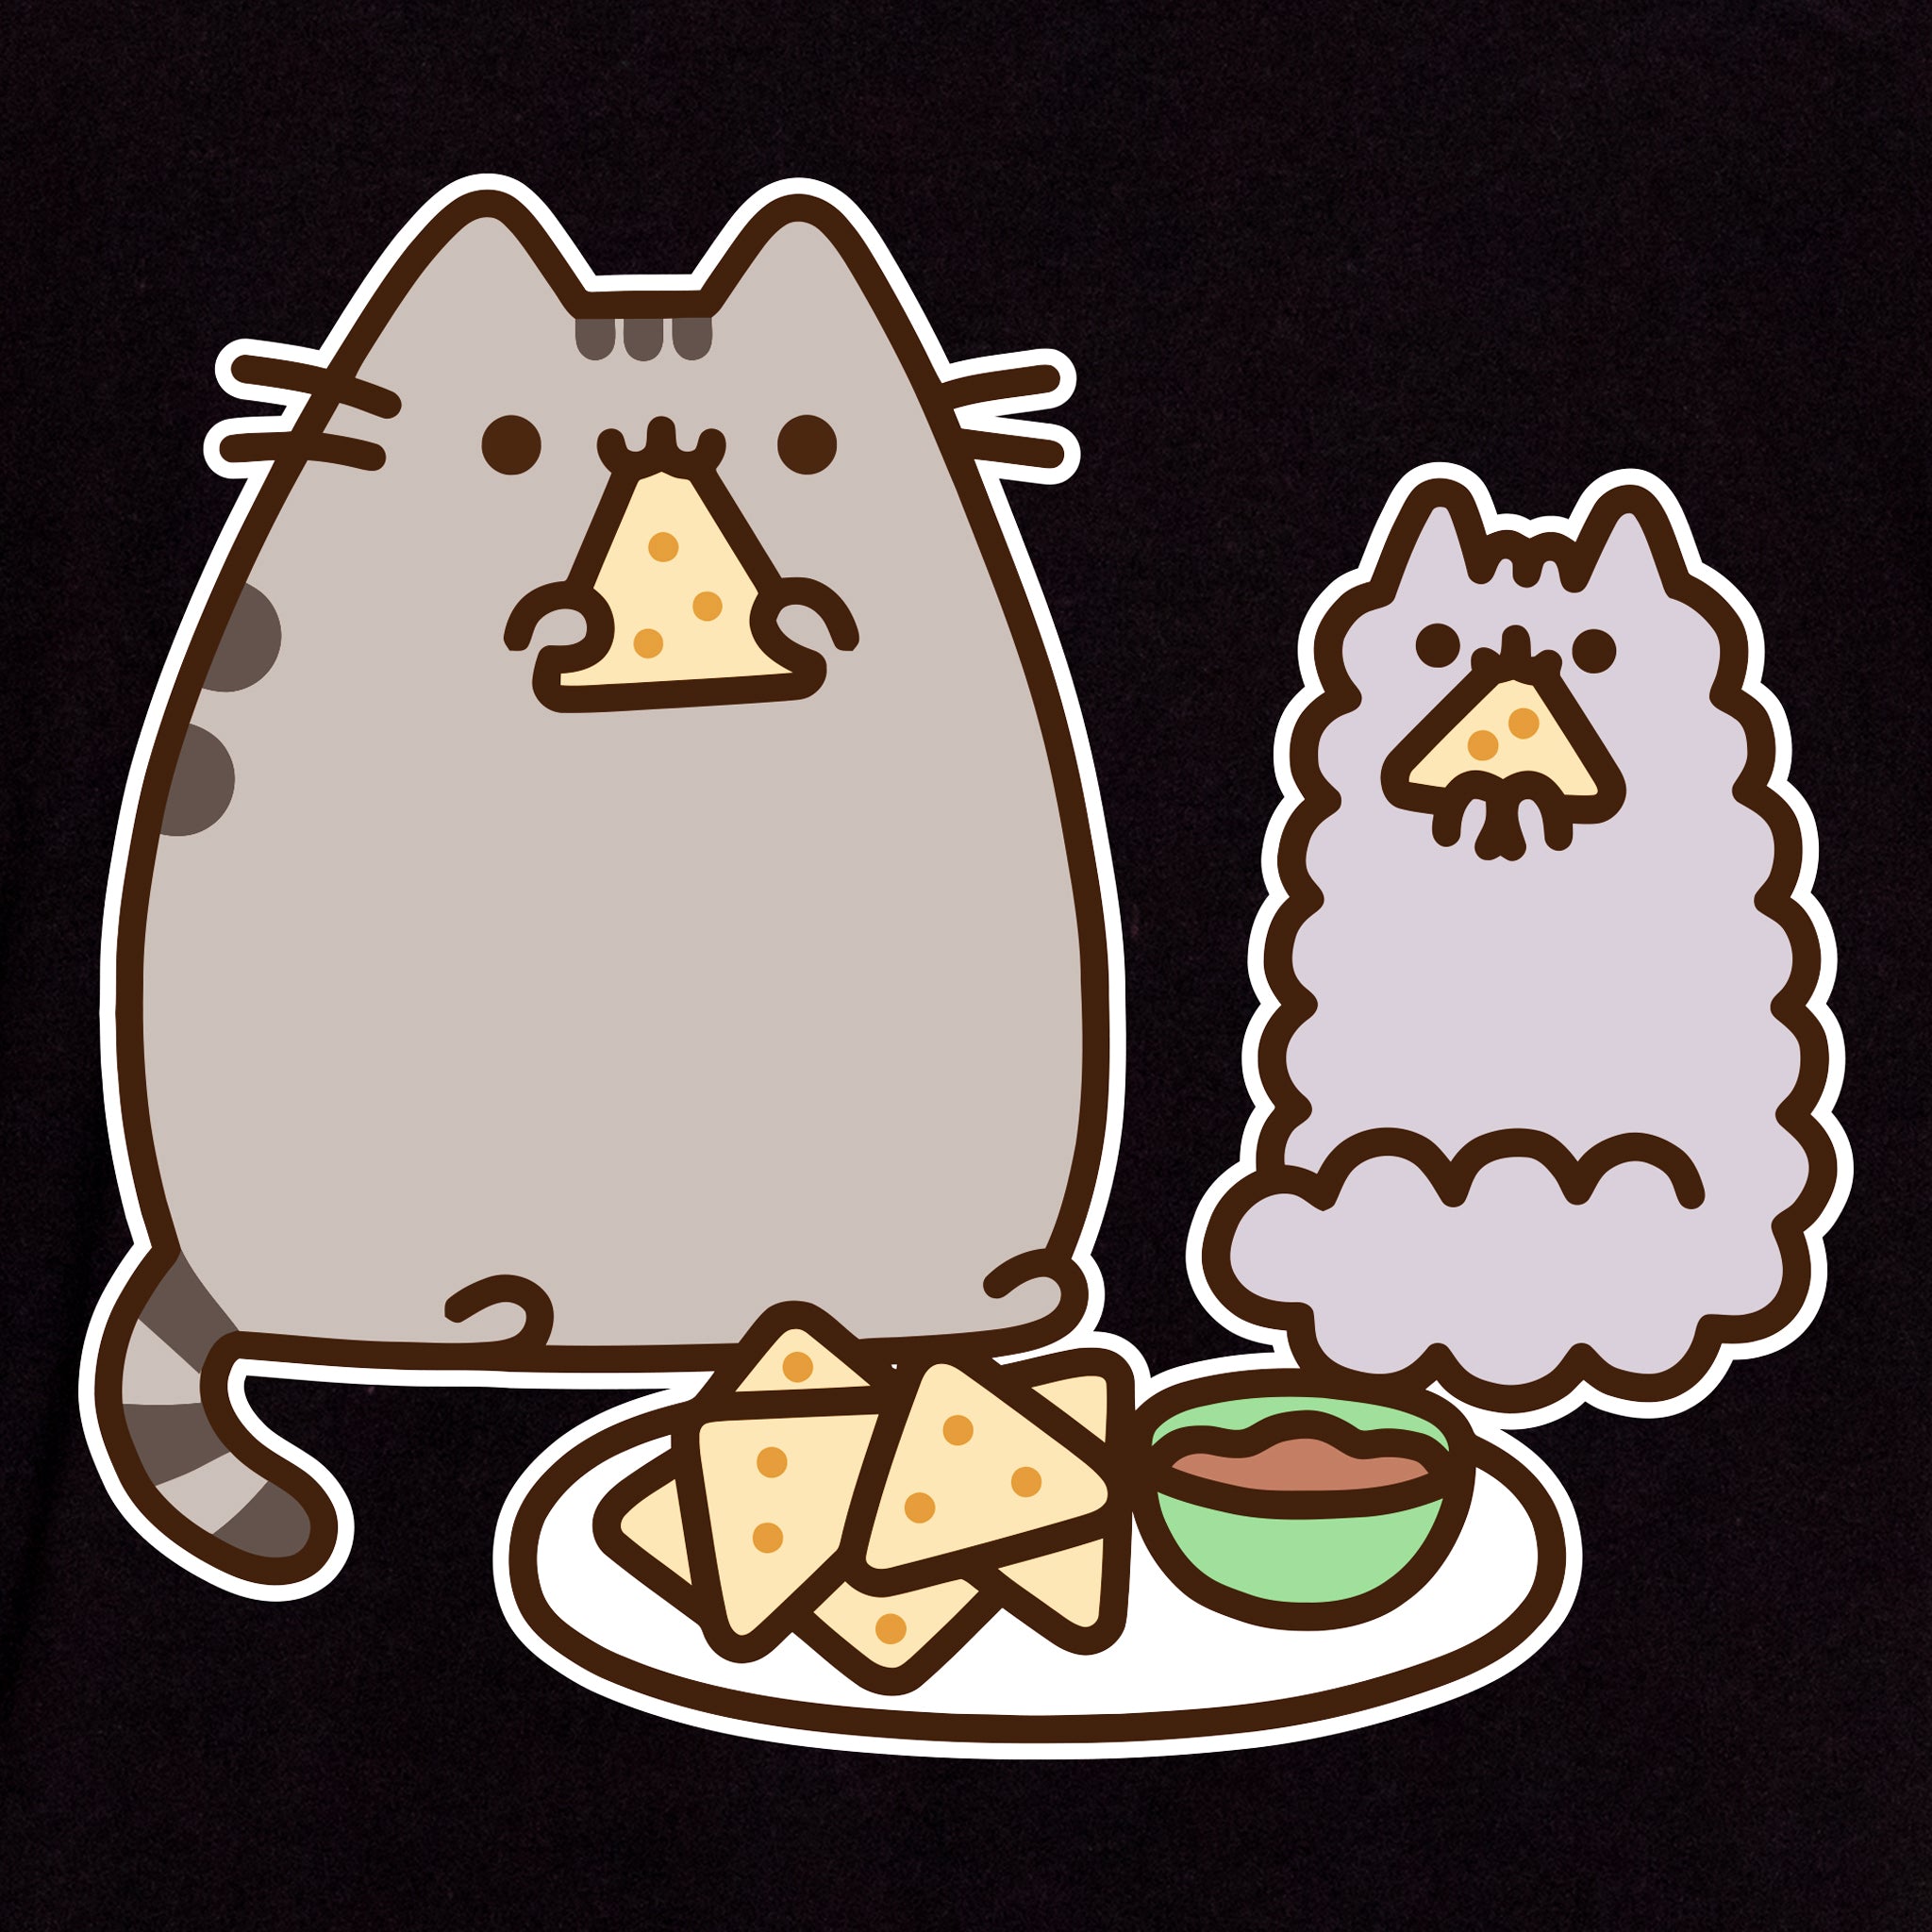 pusheen and stormy